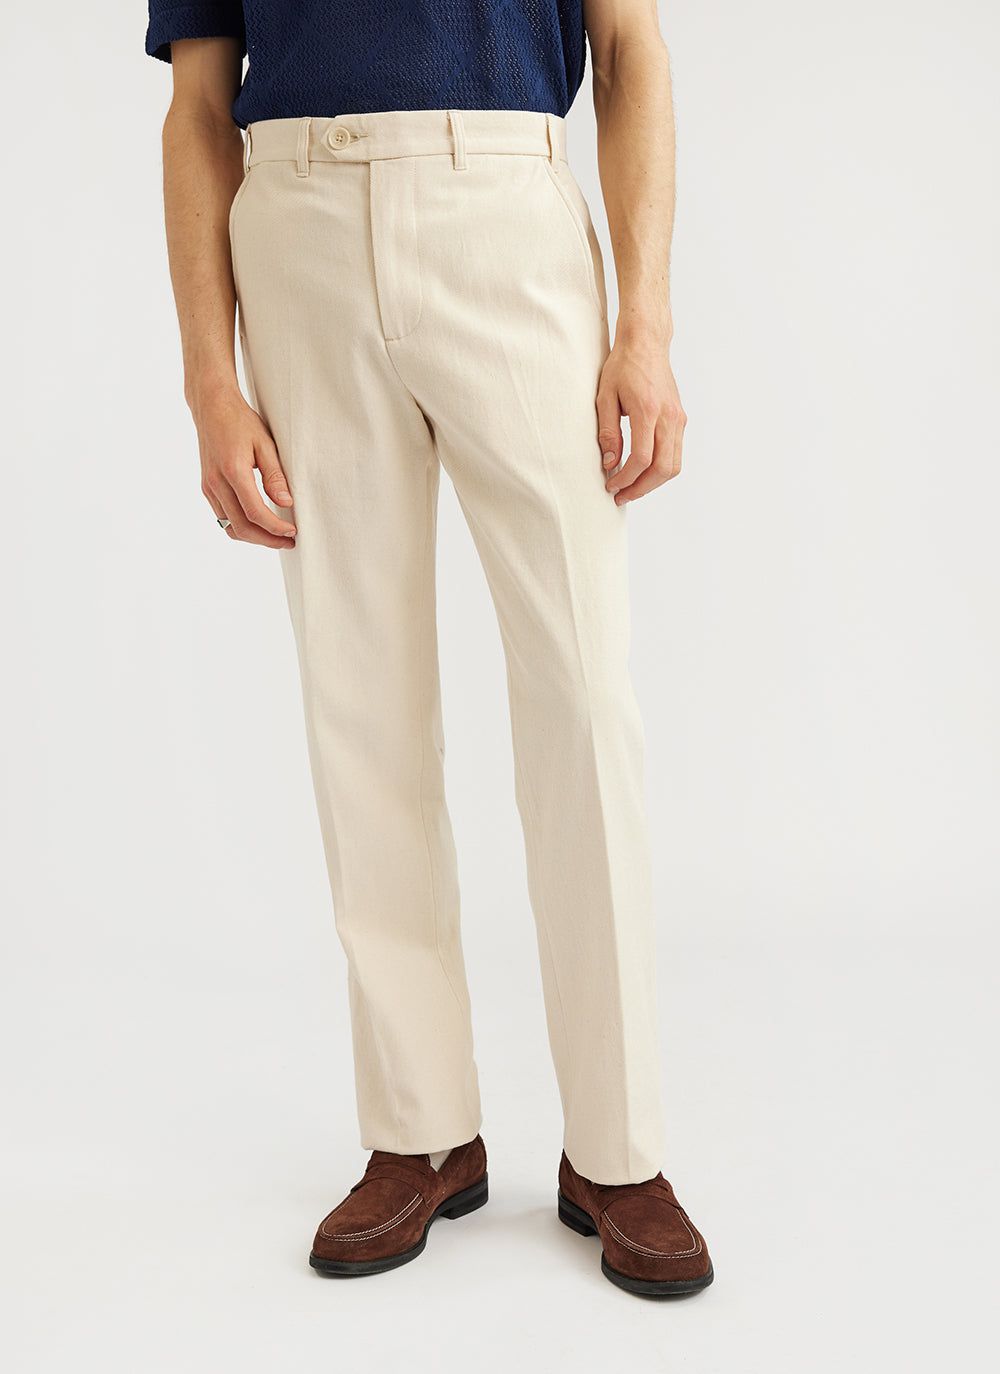 Buy Brown Trousers & Pants for Men by BROOKS BROTHERS Online | Ajio.com